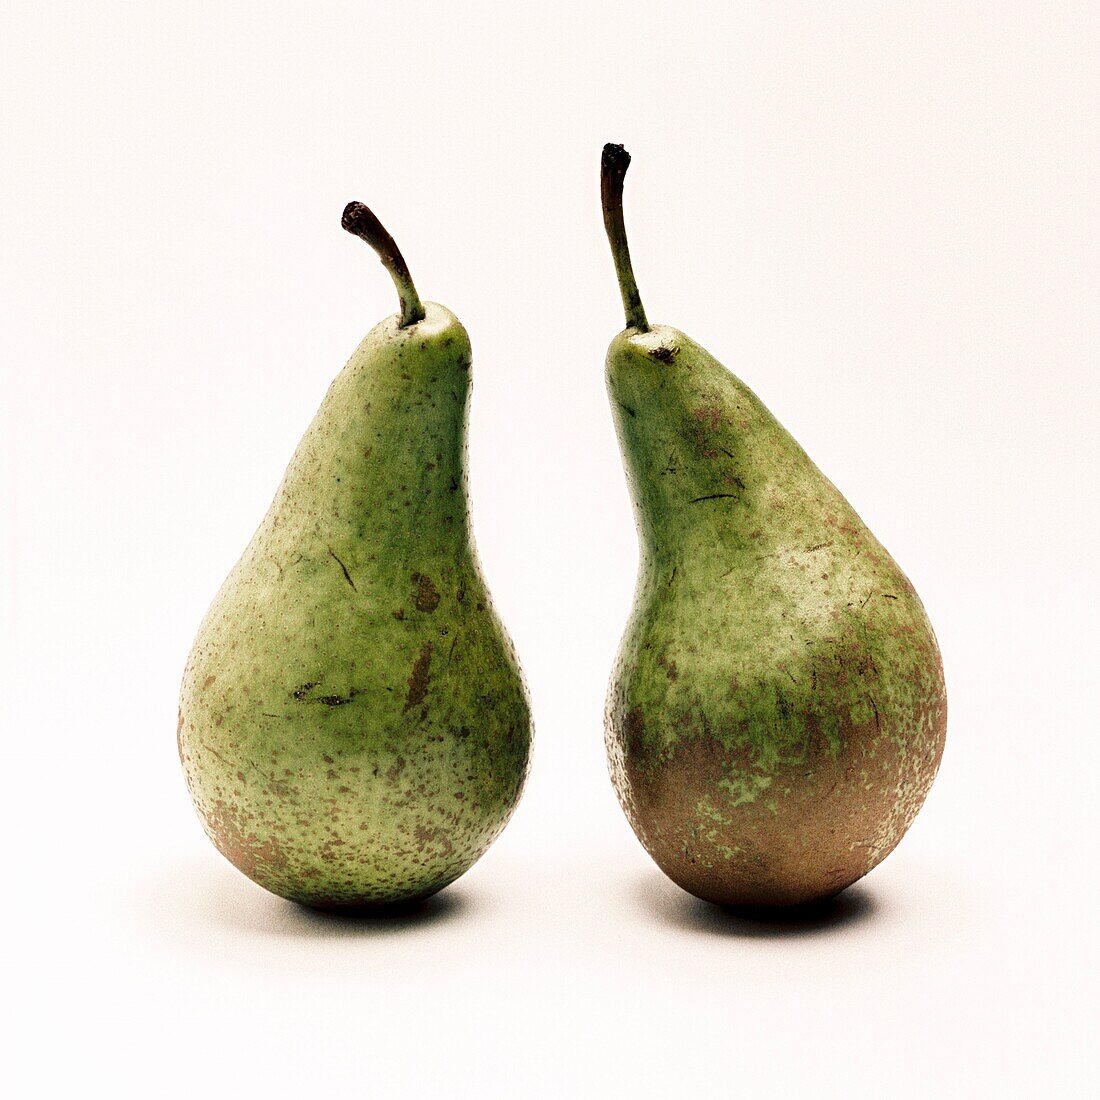 Two Conference pears